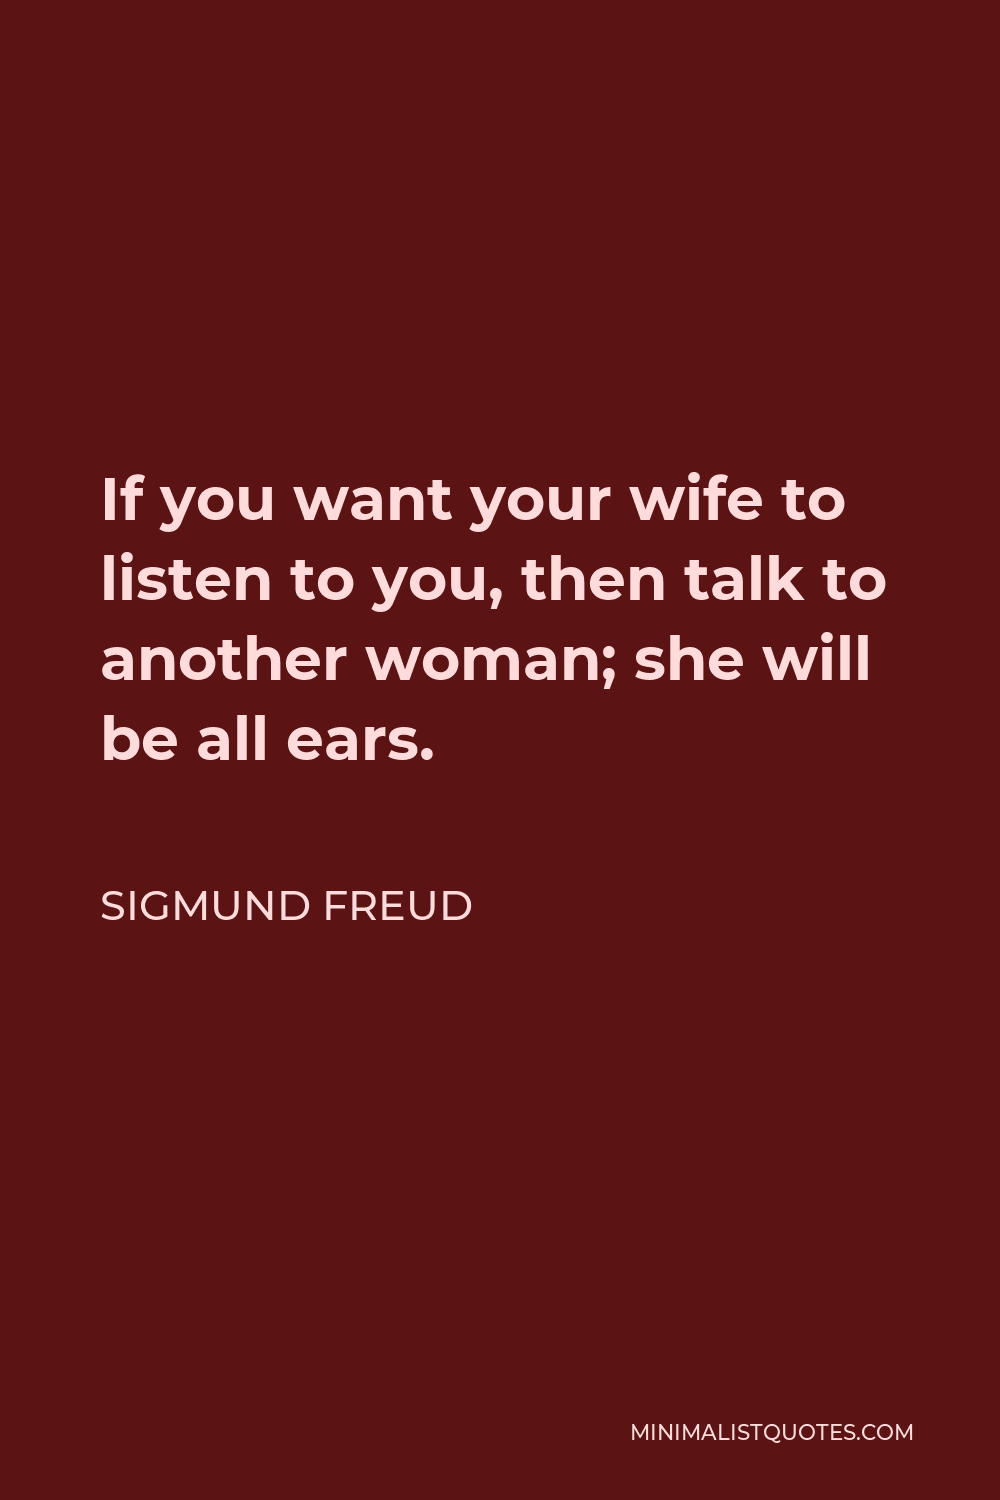 Bob Phillips Quote - If you want your wife to listen to you, talk to another woman.